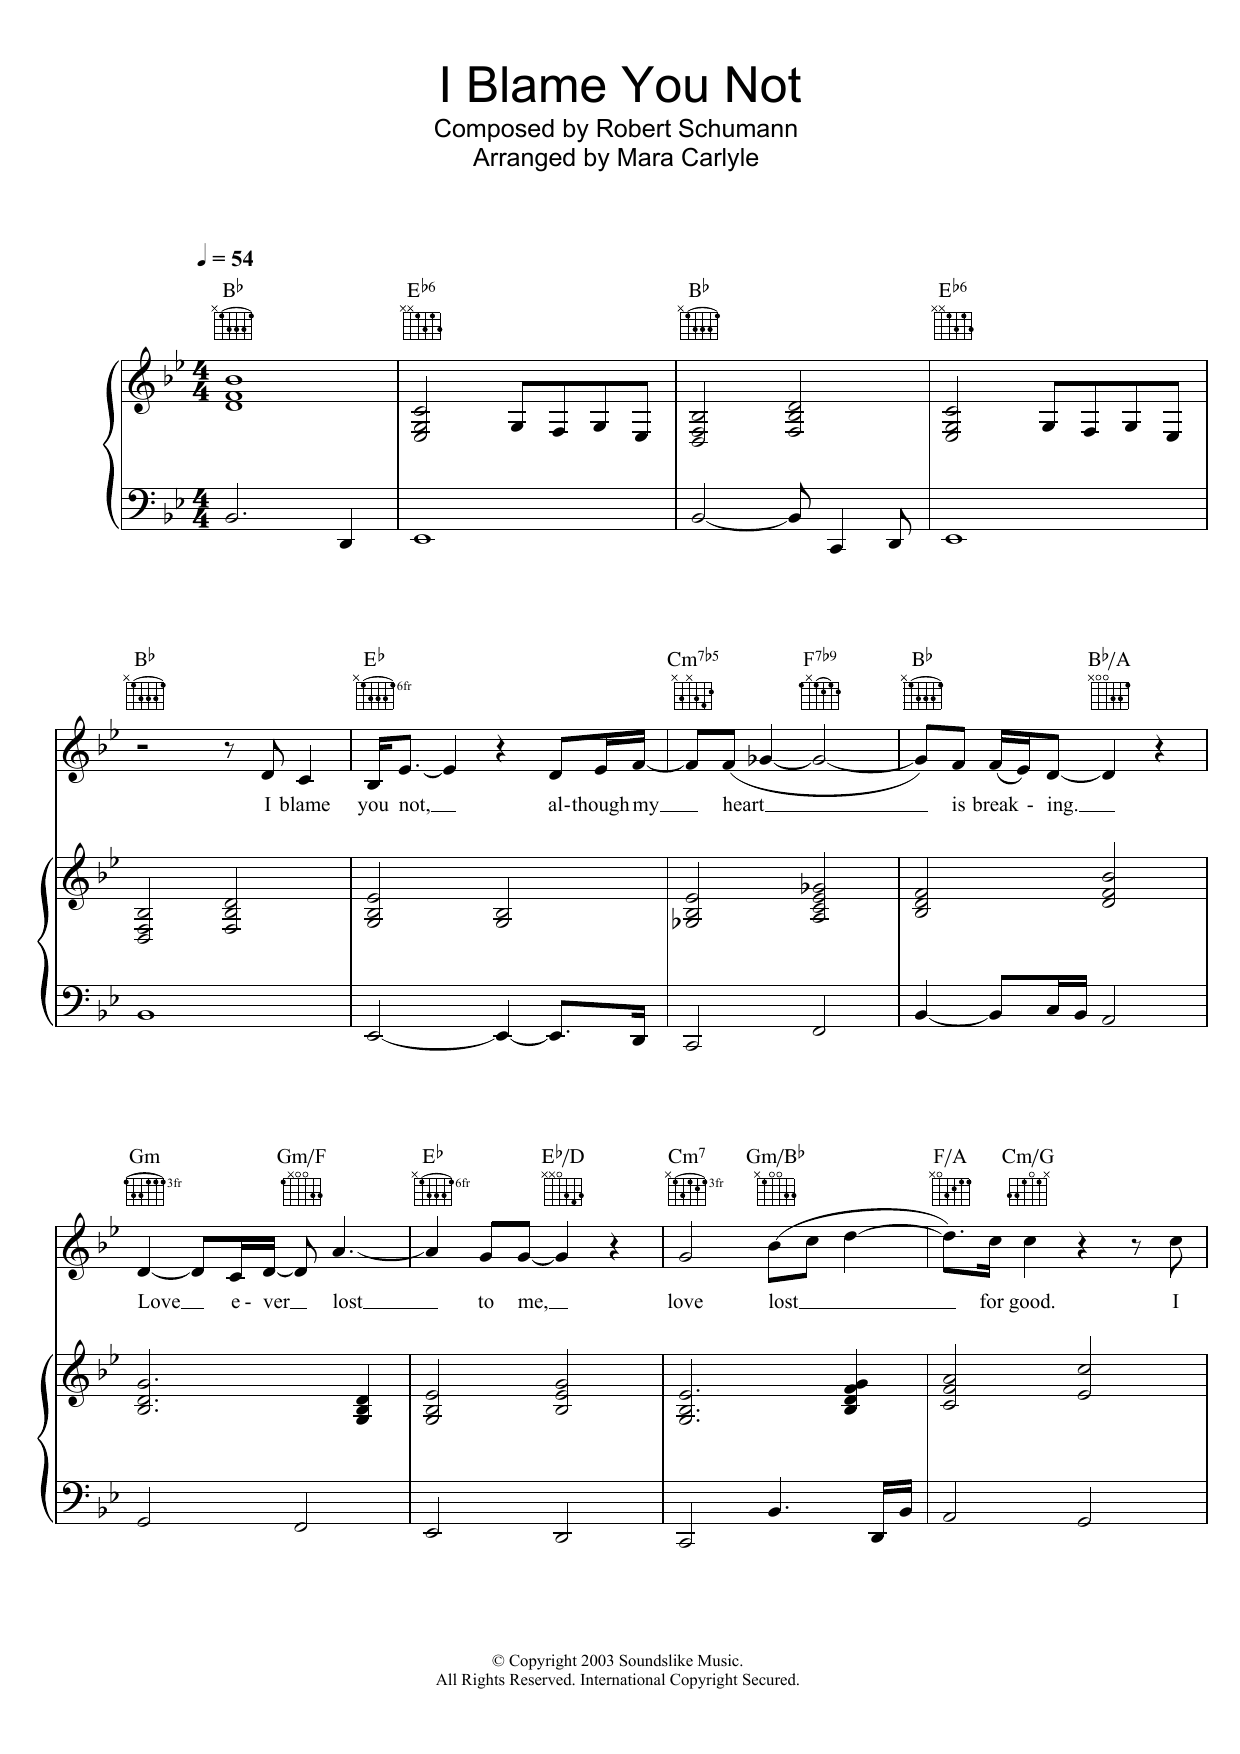 Mara Carlyle I Blame You Not sheet music notes and chords. Download Printable PDF.